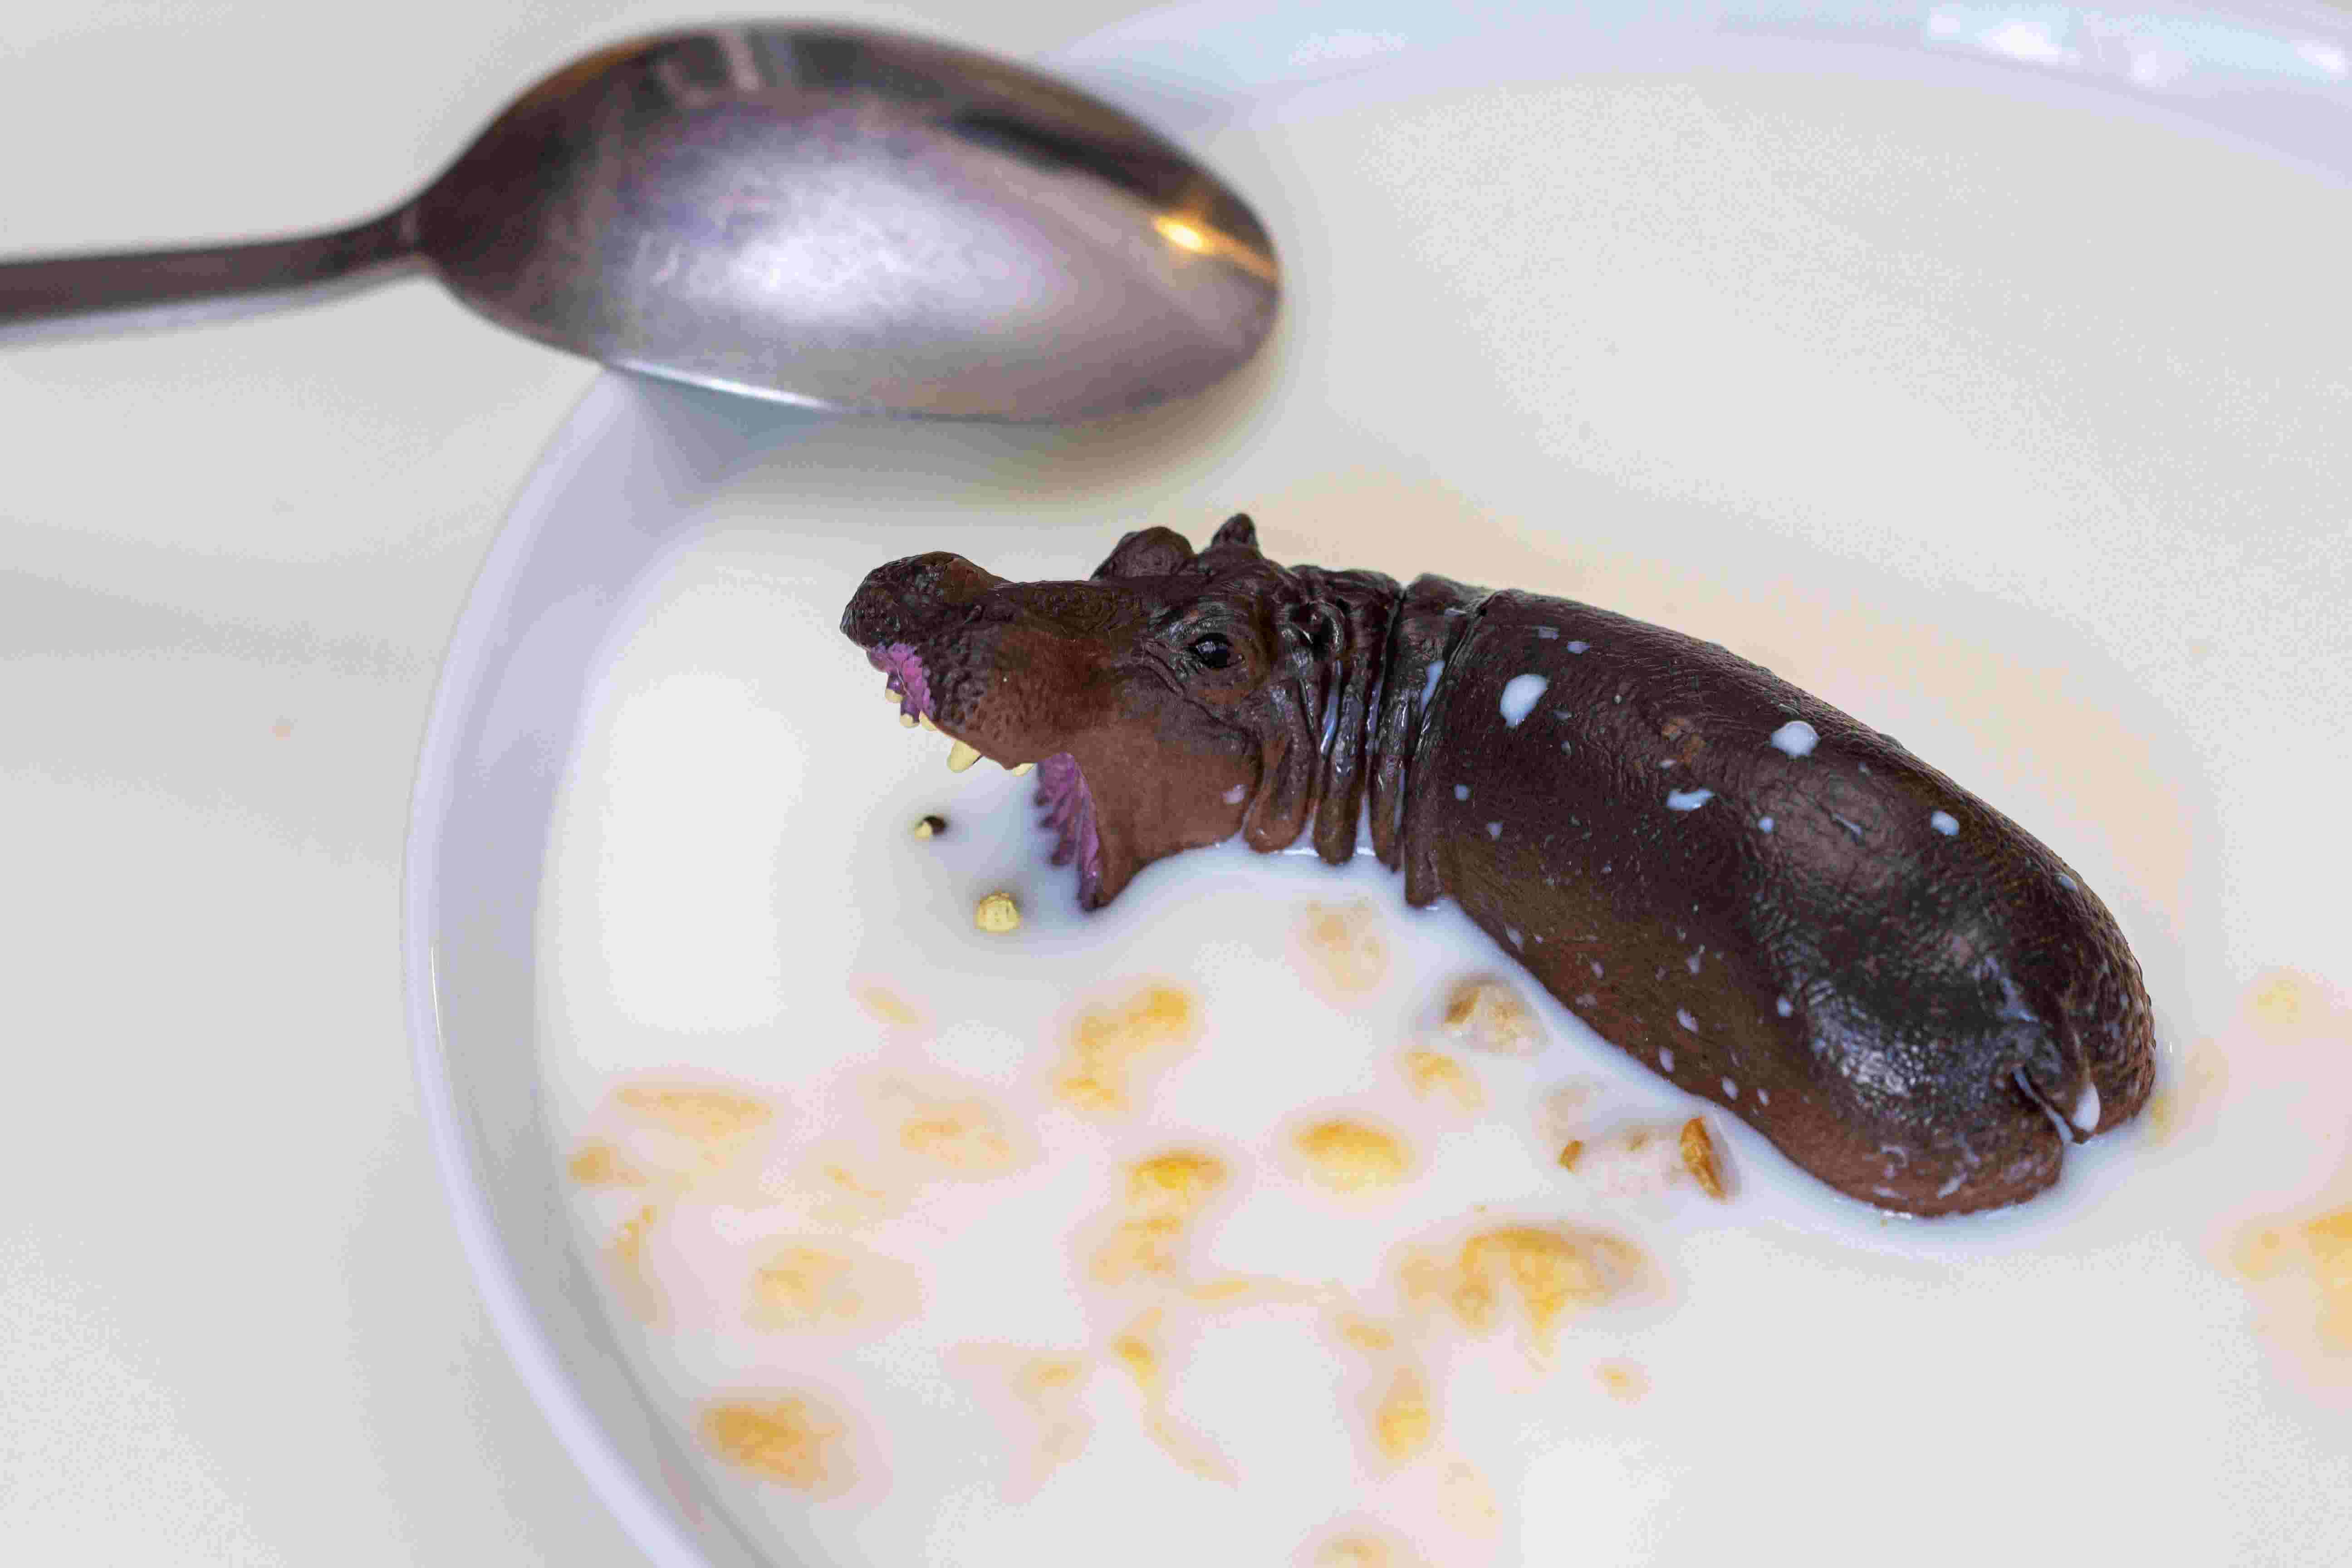 Toy hippo soaked in a bowl of cereal
            and milk